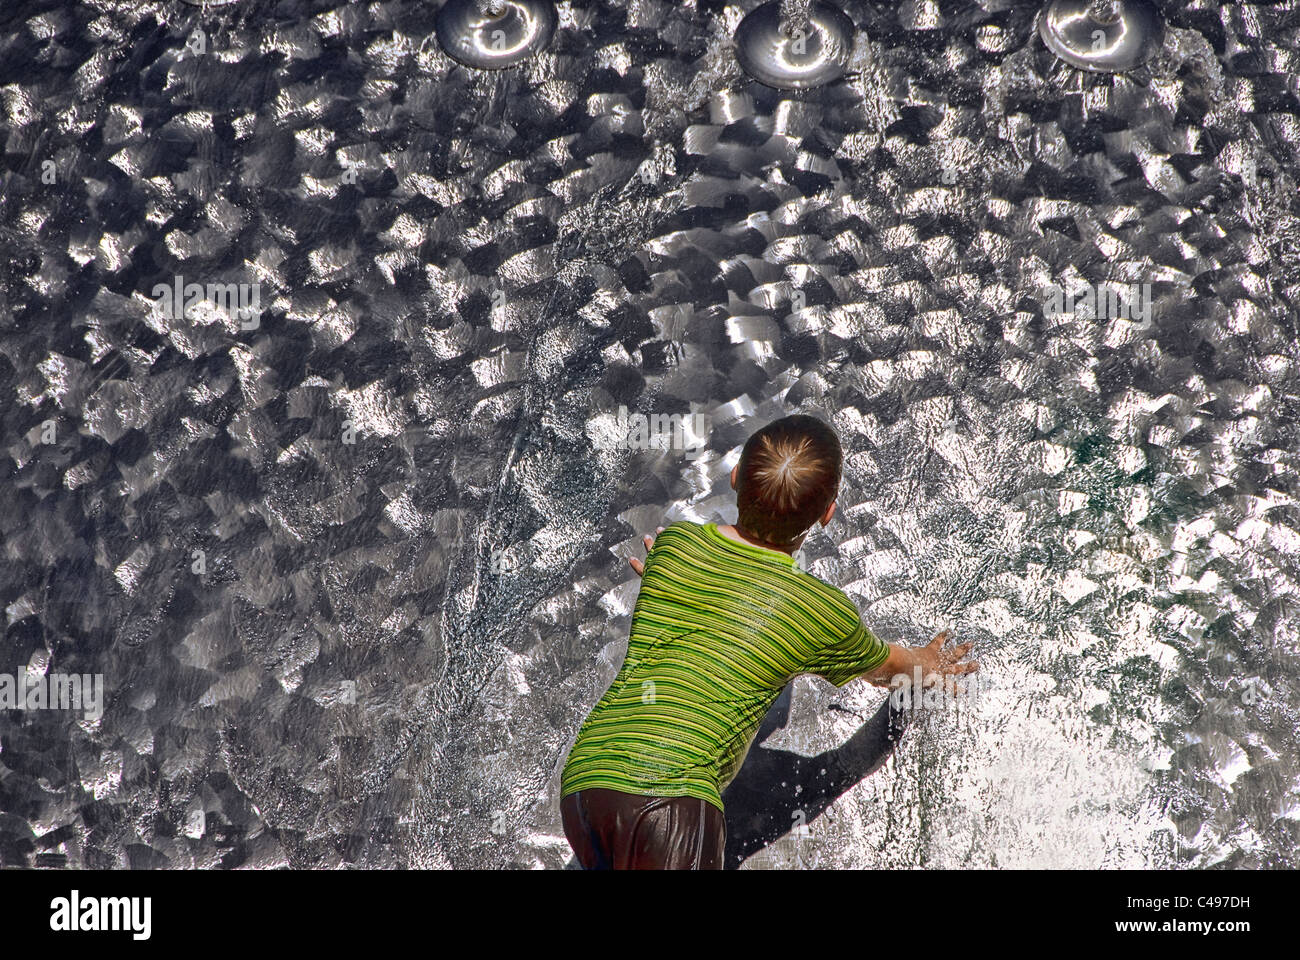 Young boy playing in steel water fountain, Seattle Center, Seattle, Washington, USA Stock Photo